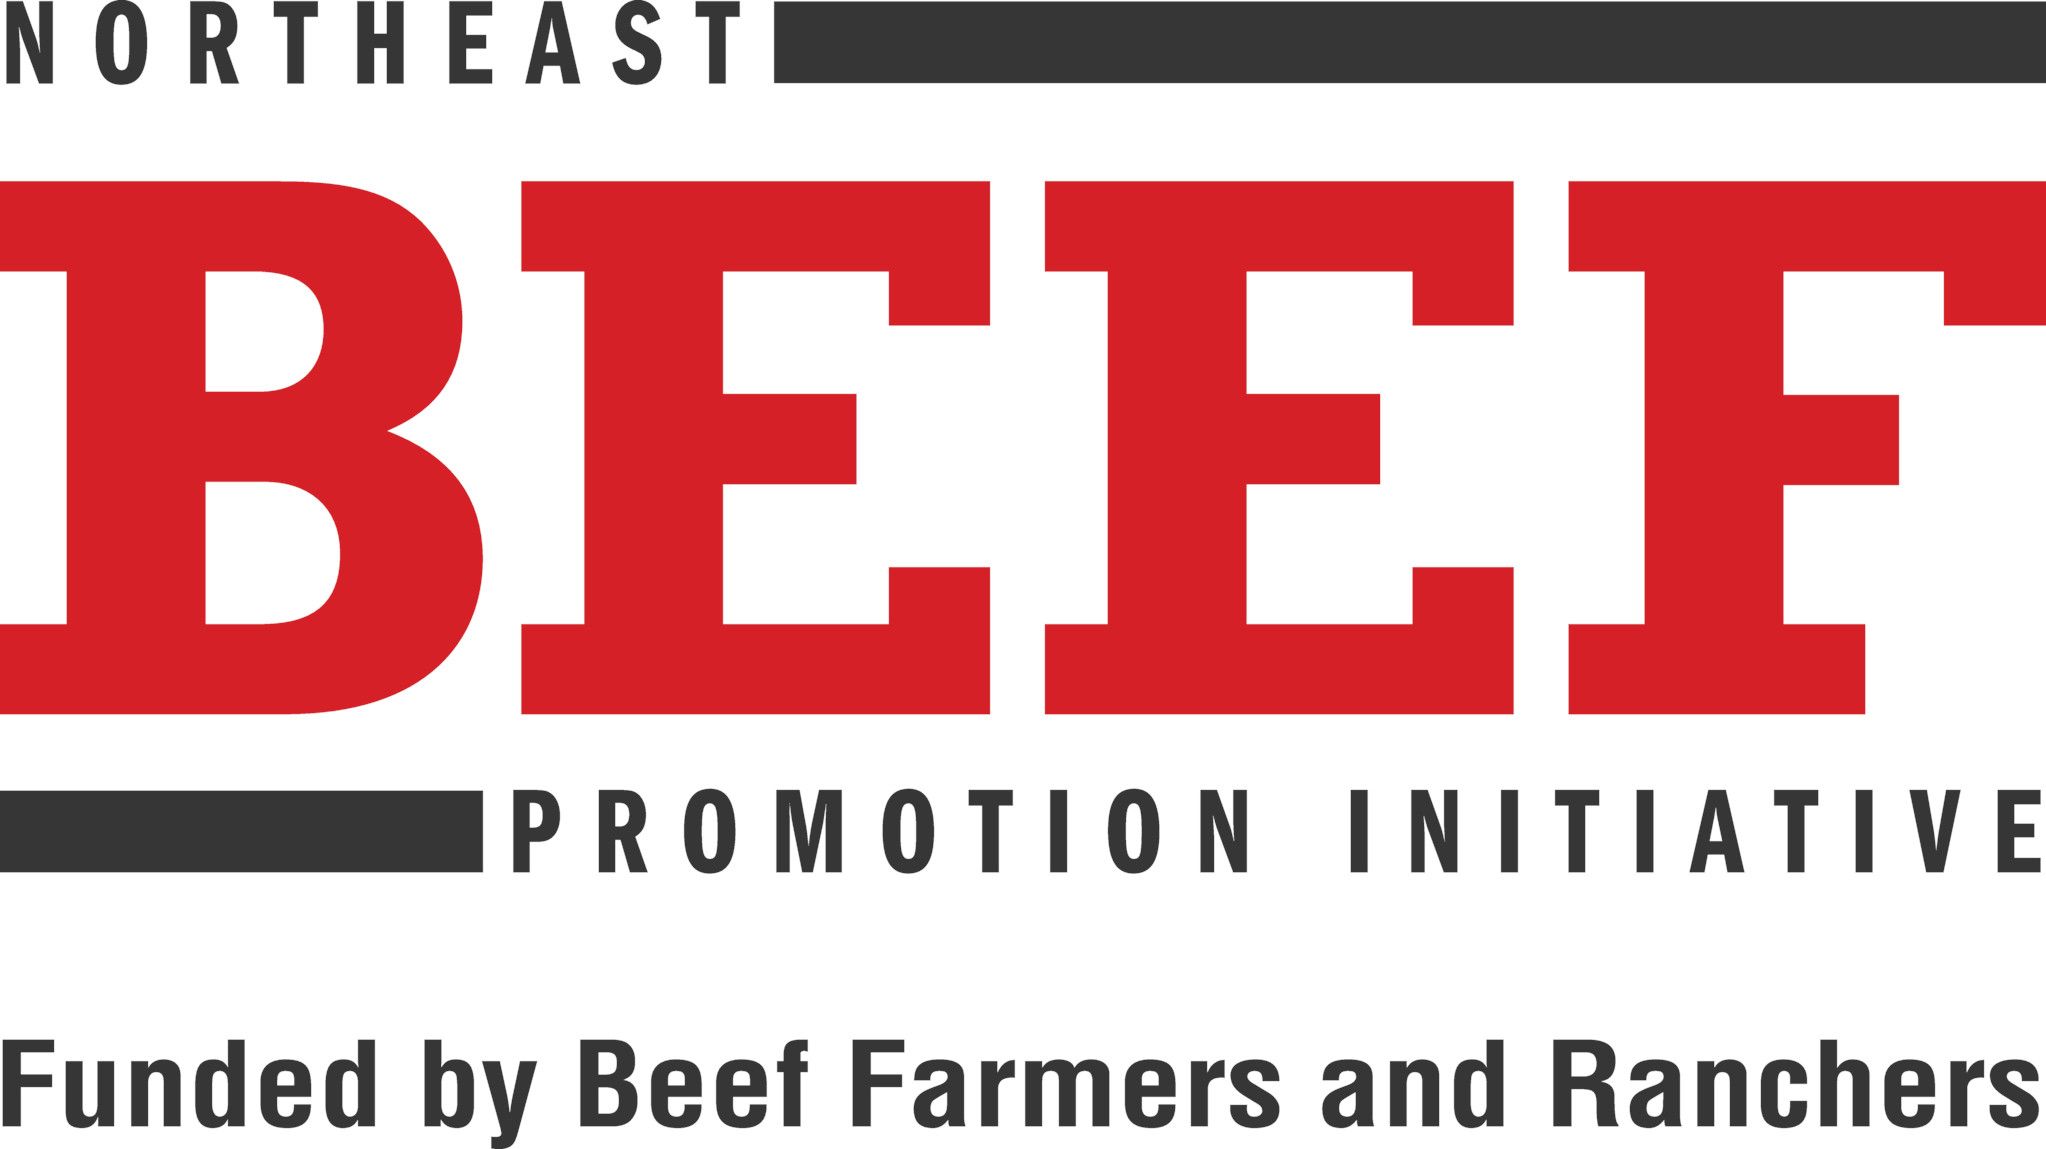 PA Beef Council